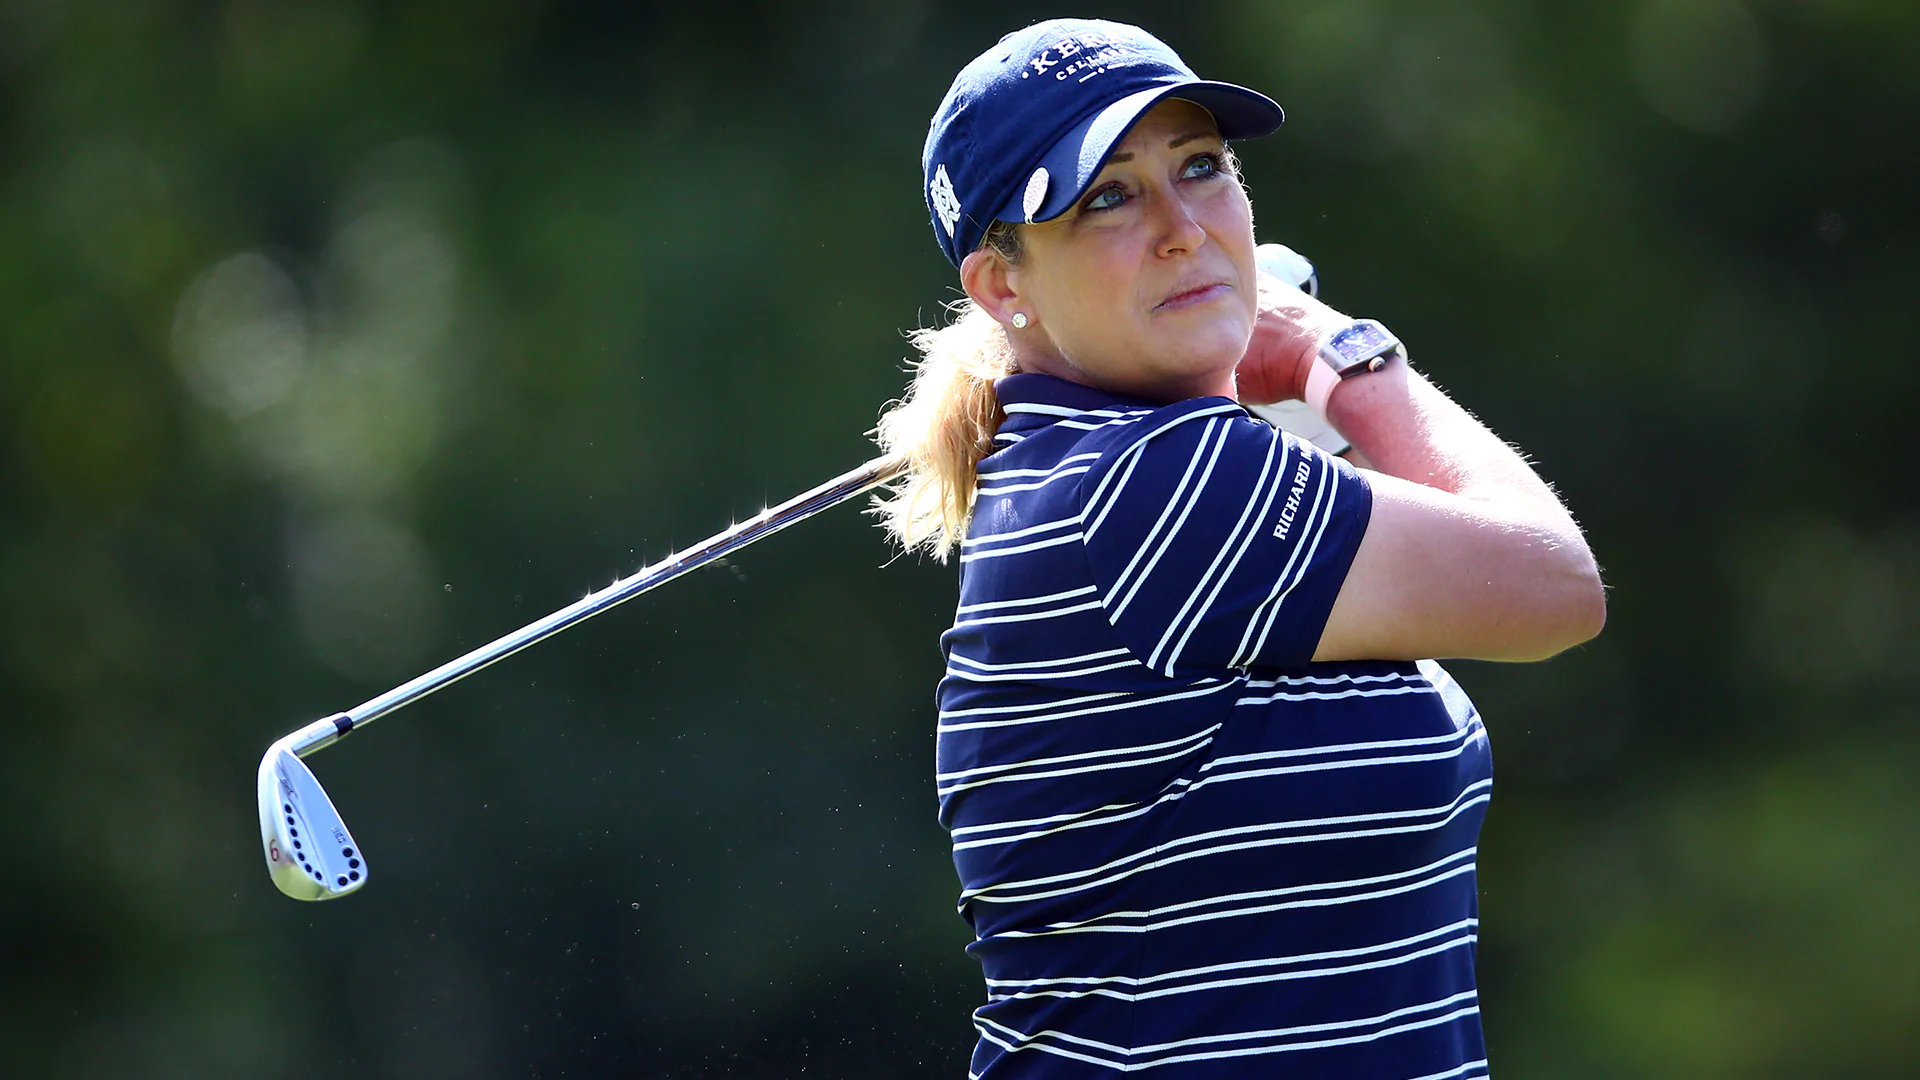 Report: Cristie Kerr and caddie taken to hospital after golf cart accident